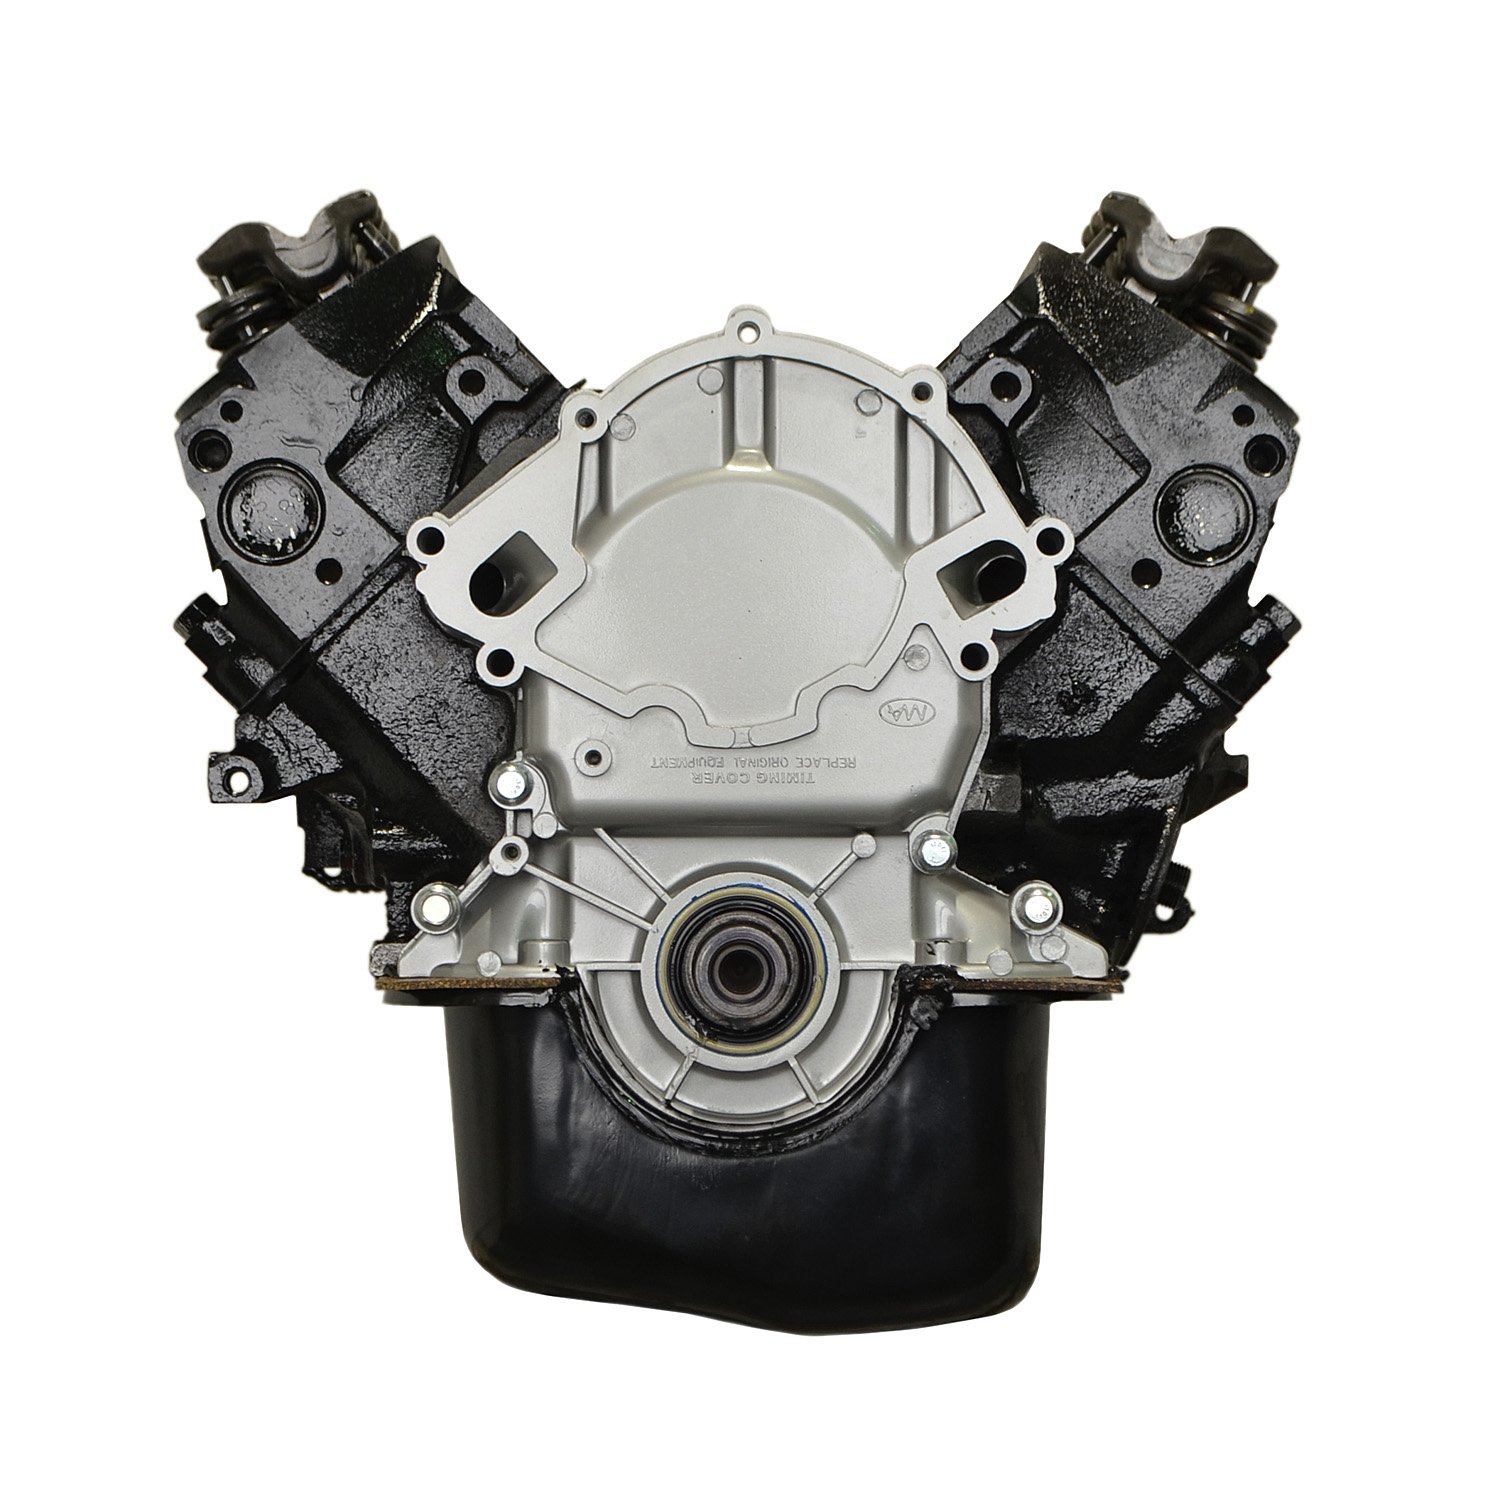 VFN1 Remanufactured Crate Engine for 1994-1996 Ford F-Series Truck & E-Series Van with 302ci/5.0L V8